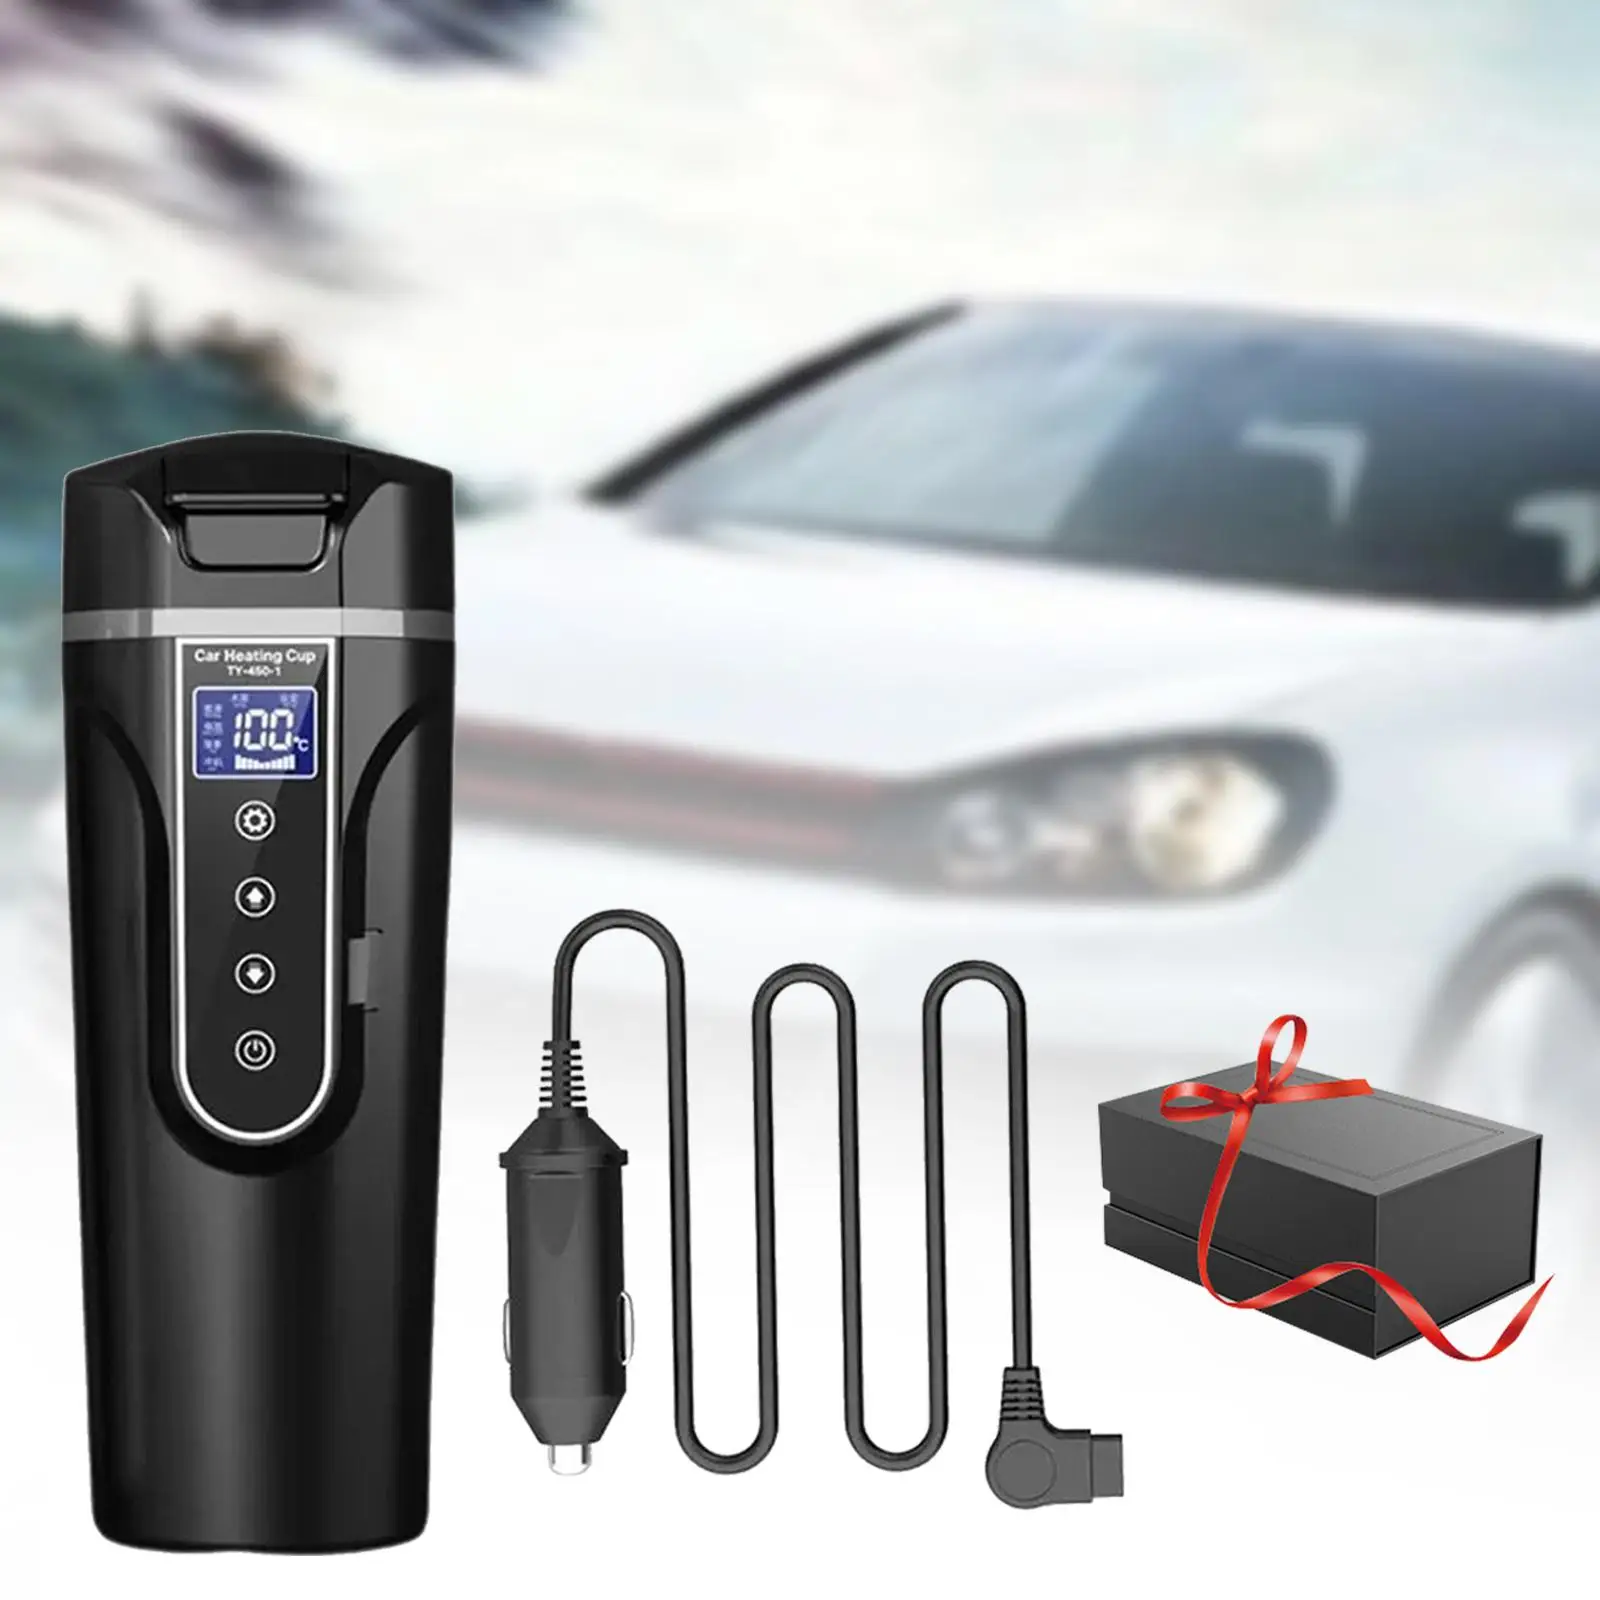 Car Heating Cup Water Boiler Vacuum Insulated Mugs 24V/12V Car Traveling Kettle for Car Truck Drivers Trip Tea Coffee Water Milk